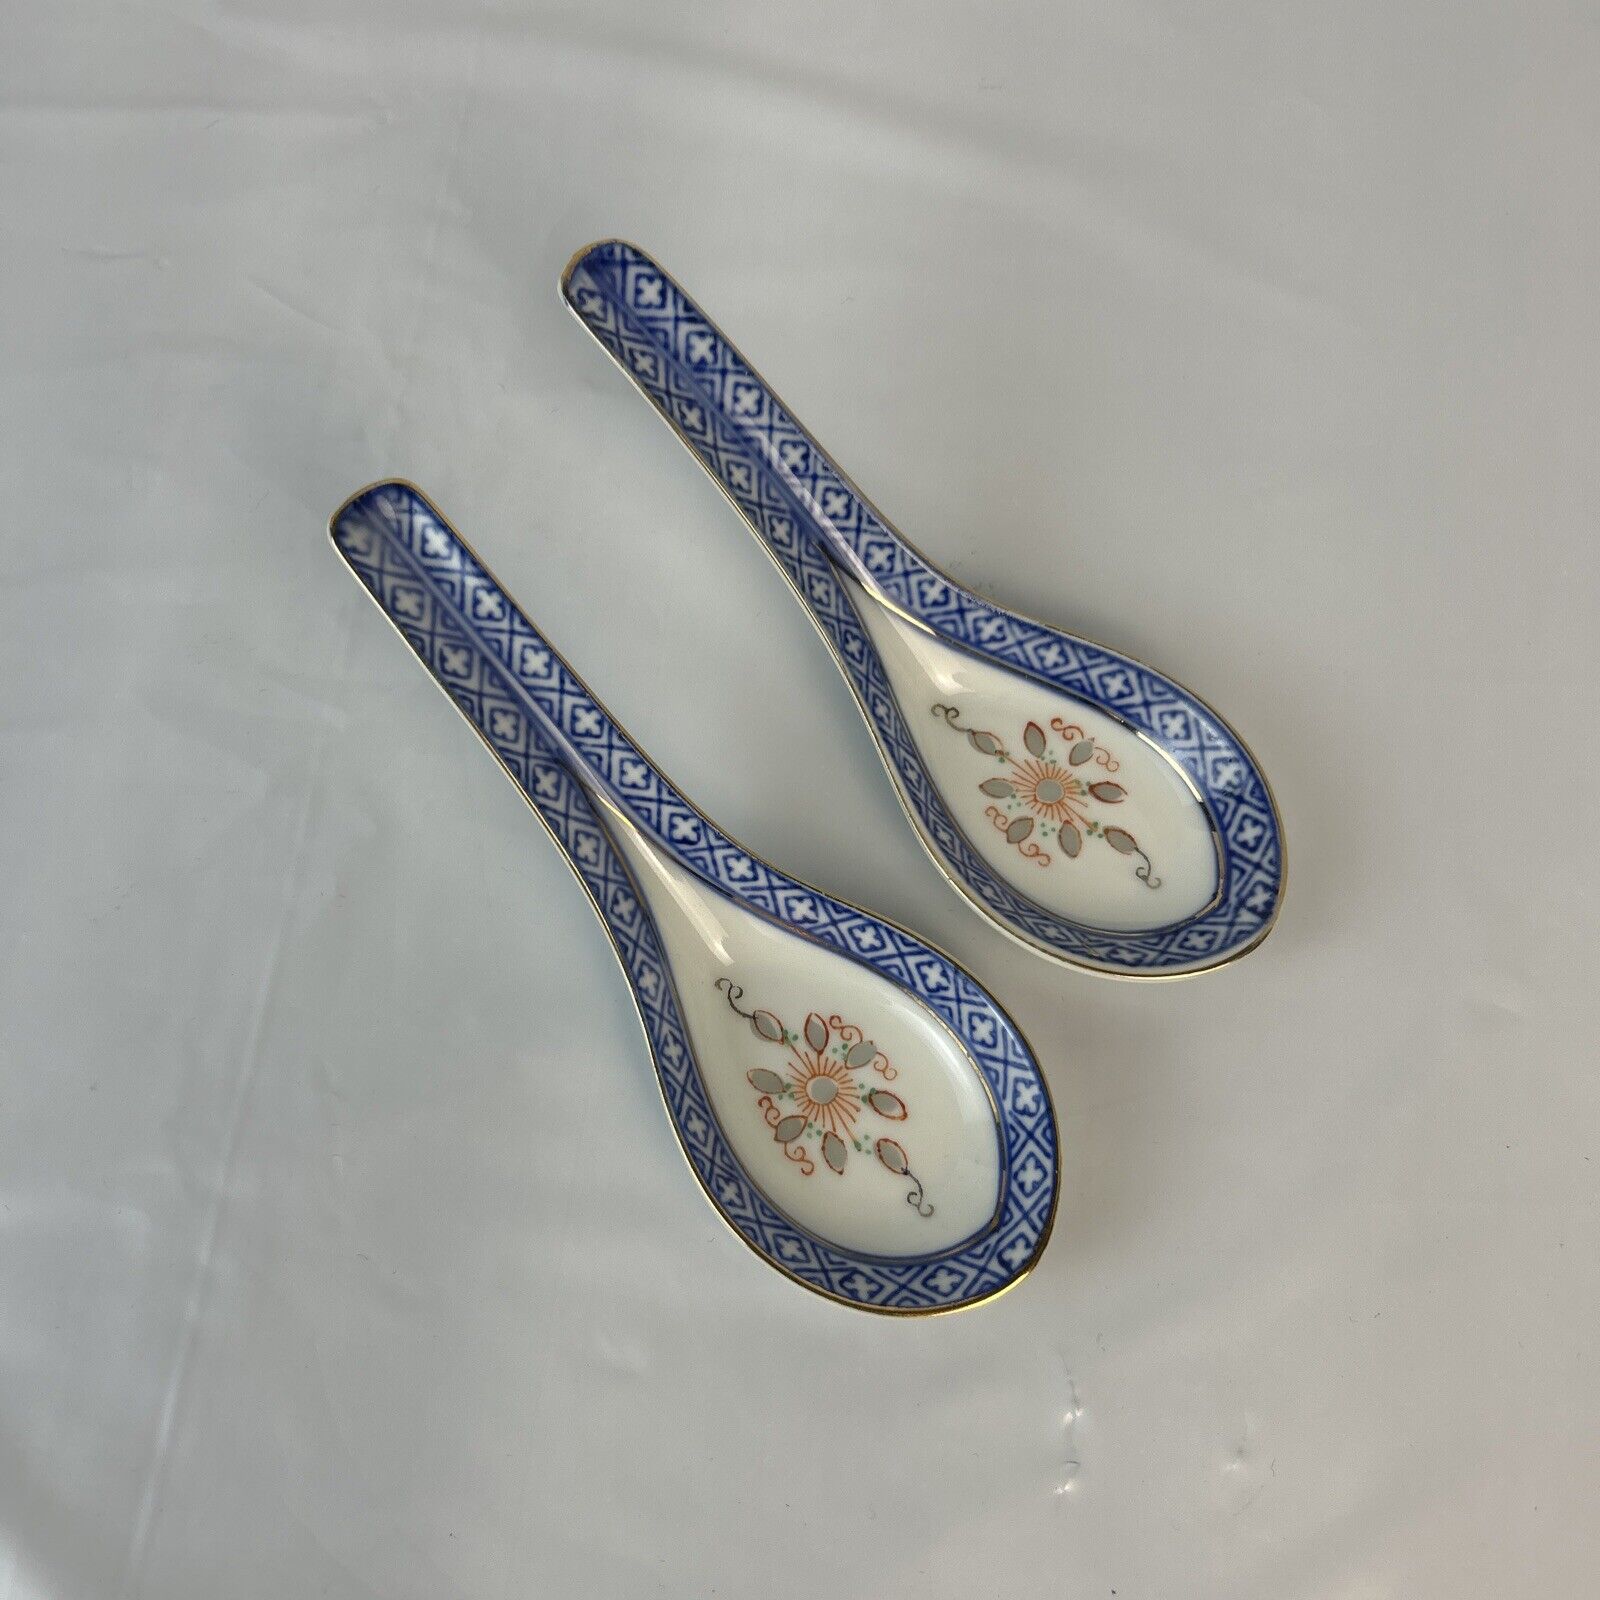 2  Vintage  CHINESE JAPANESE ASIAN CERAMIC SOUP Rice Spoons Blue pattern